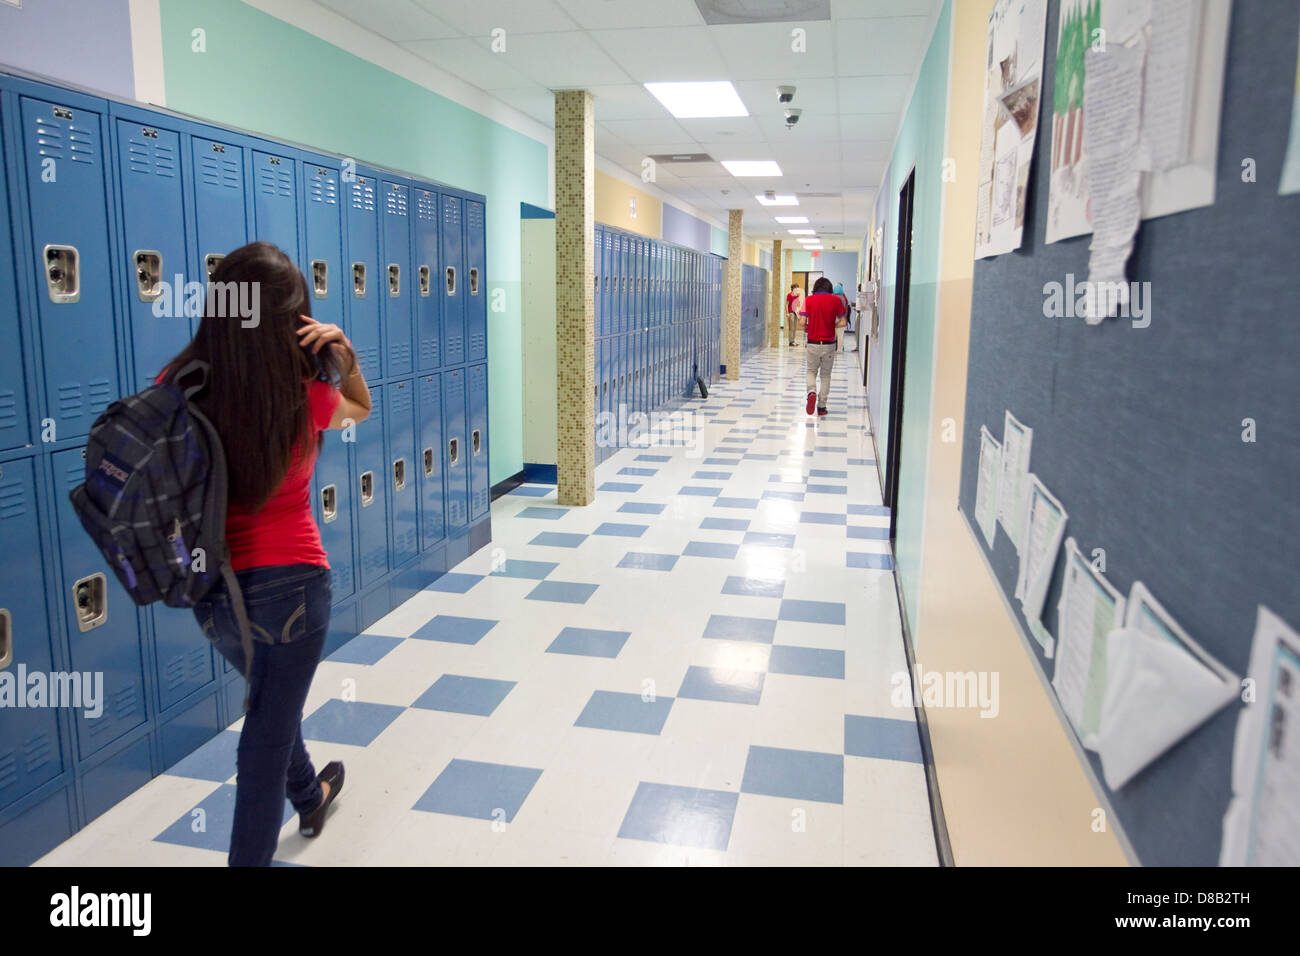 Female high school student wearing a backpack, walks down hallway with lockers at Austin, Texas school Stock Photo